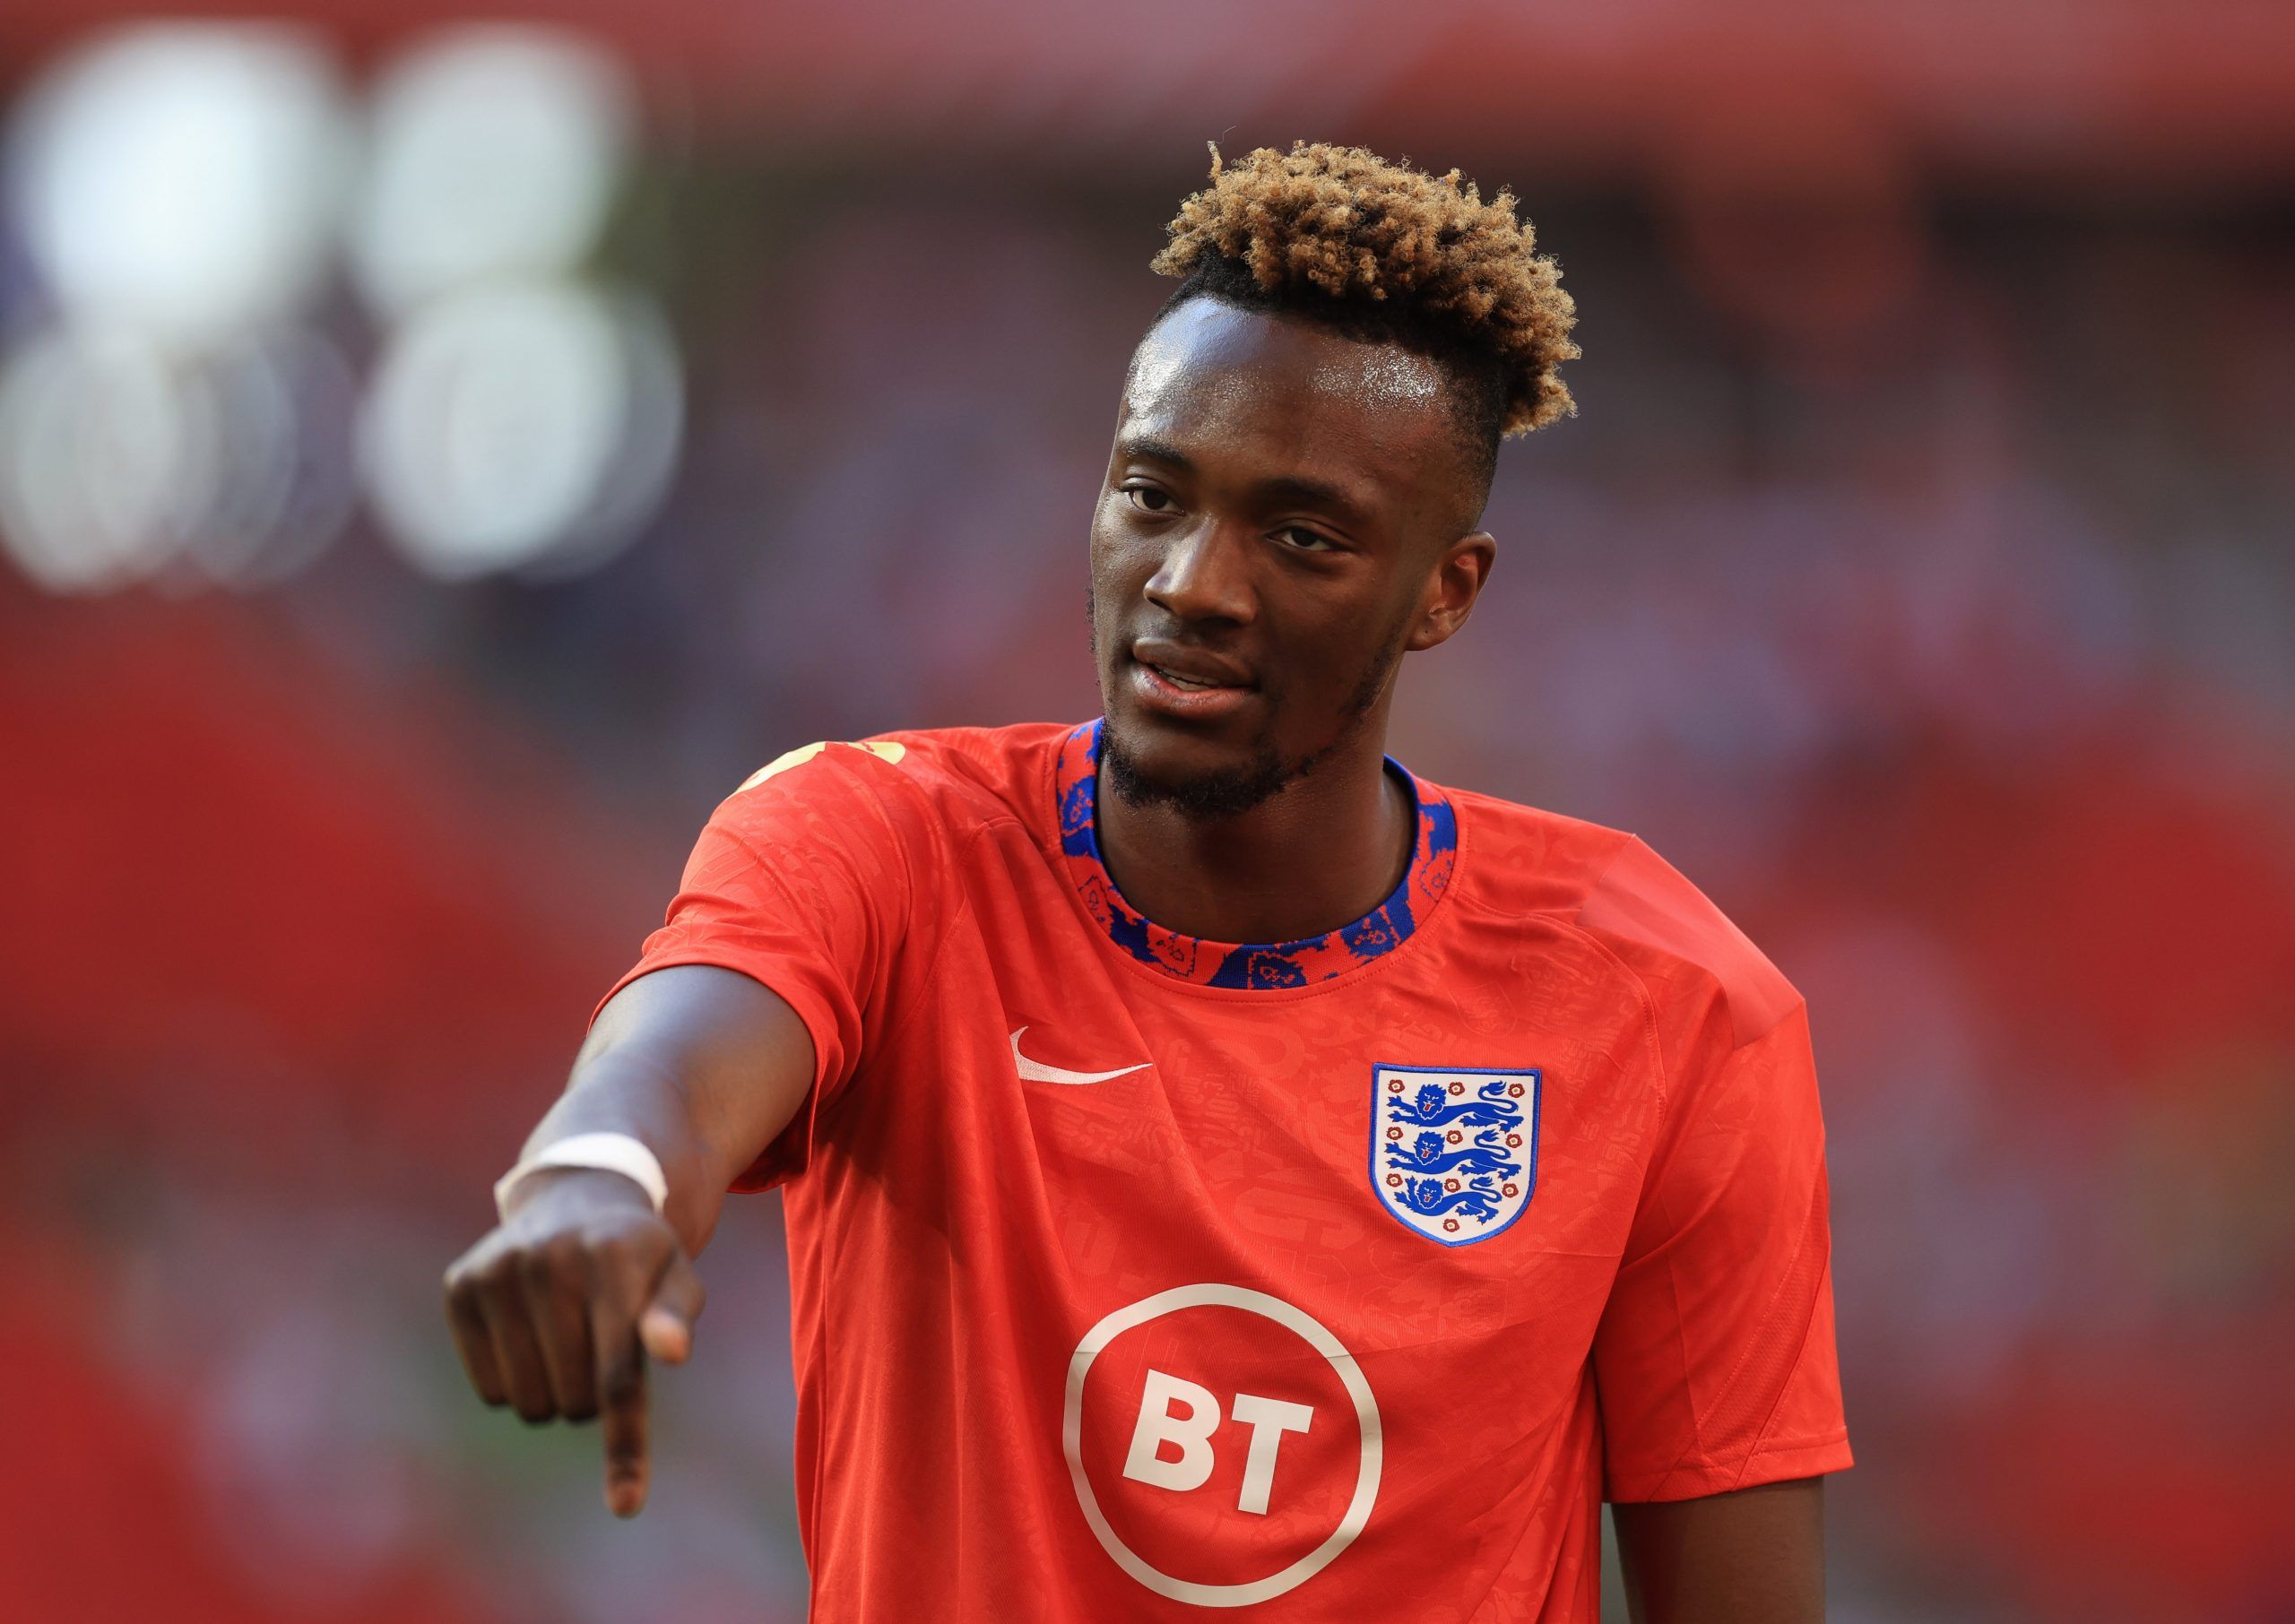 Soccer Football - UEFA Nations League - Group C - Hungary v England - Puskas Arena Park, Budapest, Hungary - June 4, 2022 England's Tammy Abraham during the warm up before the match Action Images via Reuters/Lee Smith